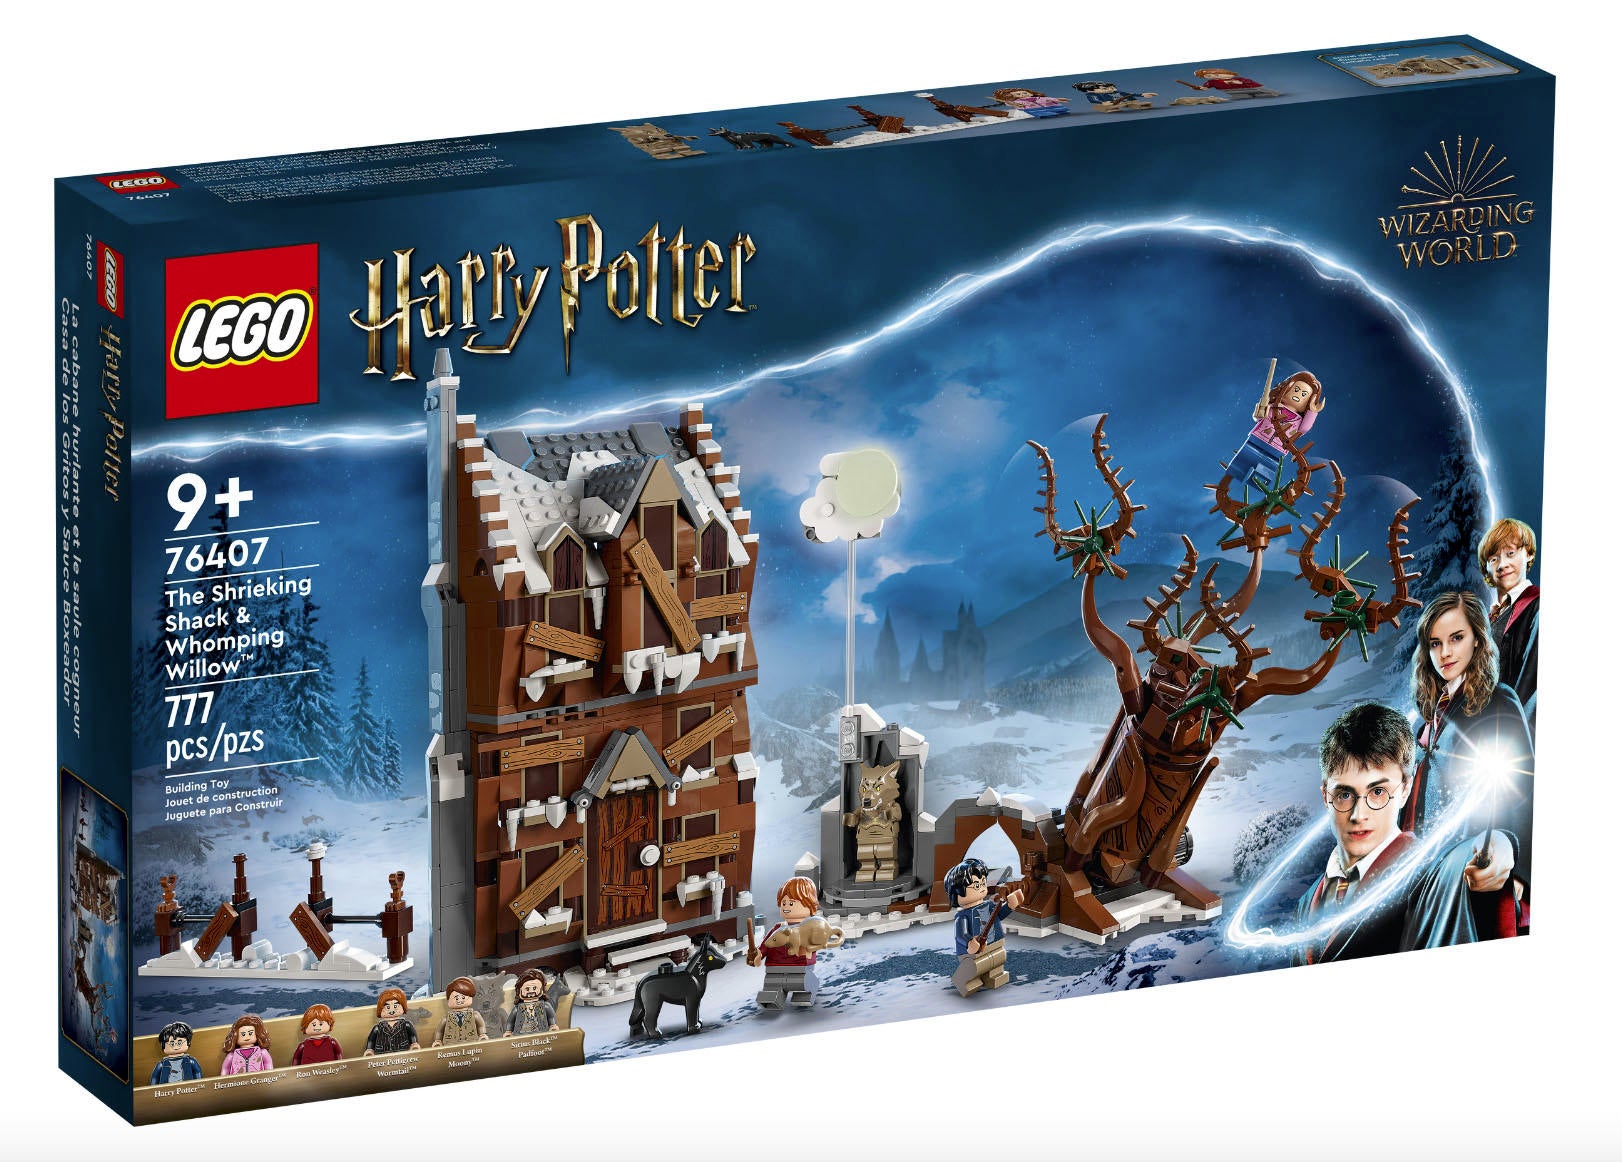 Harry Potter Lego 2022 LEGO Harry Potter Summer 2022 Sets Are On Sale Now